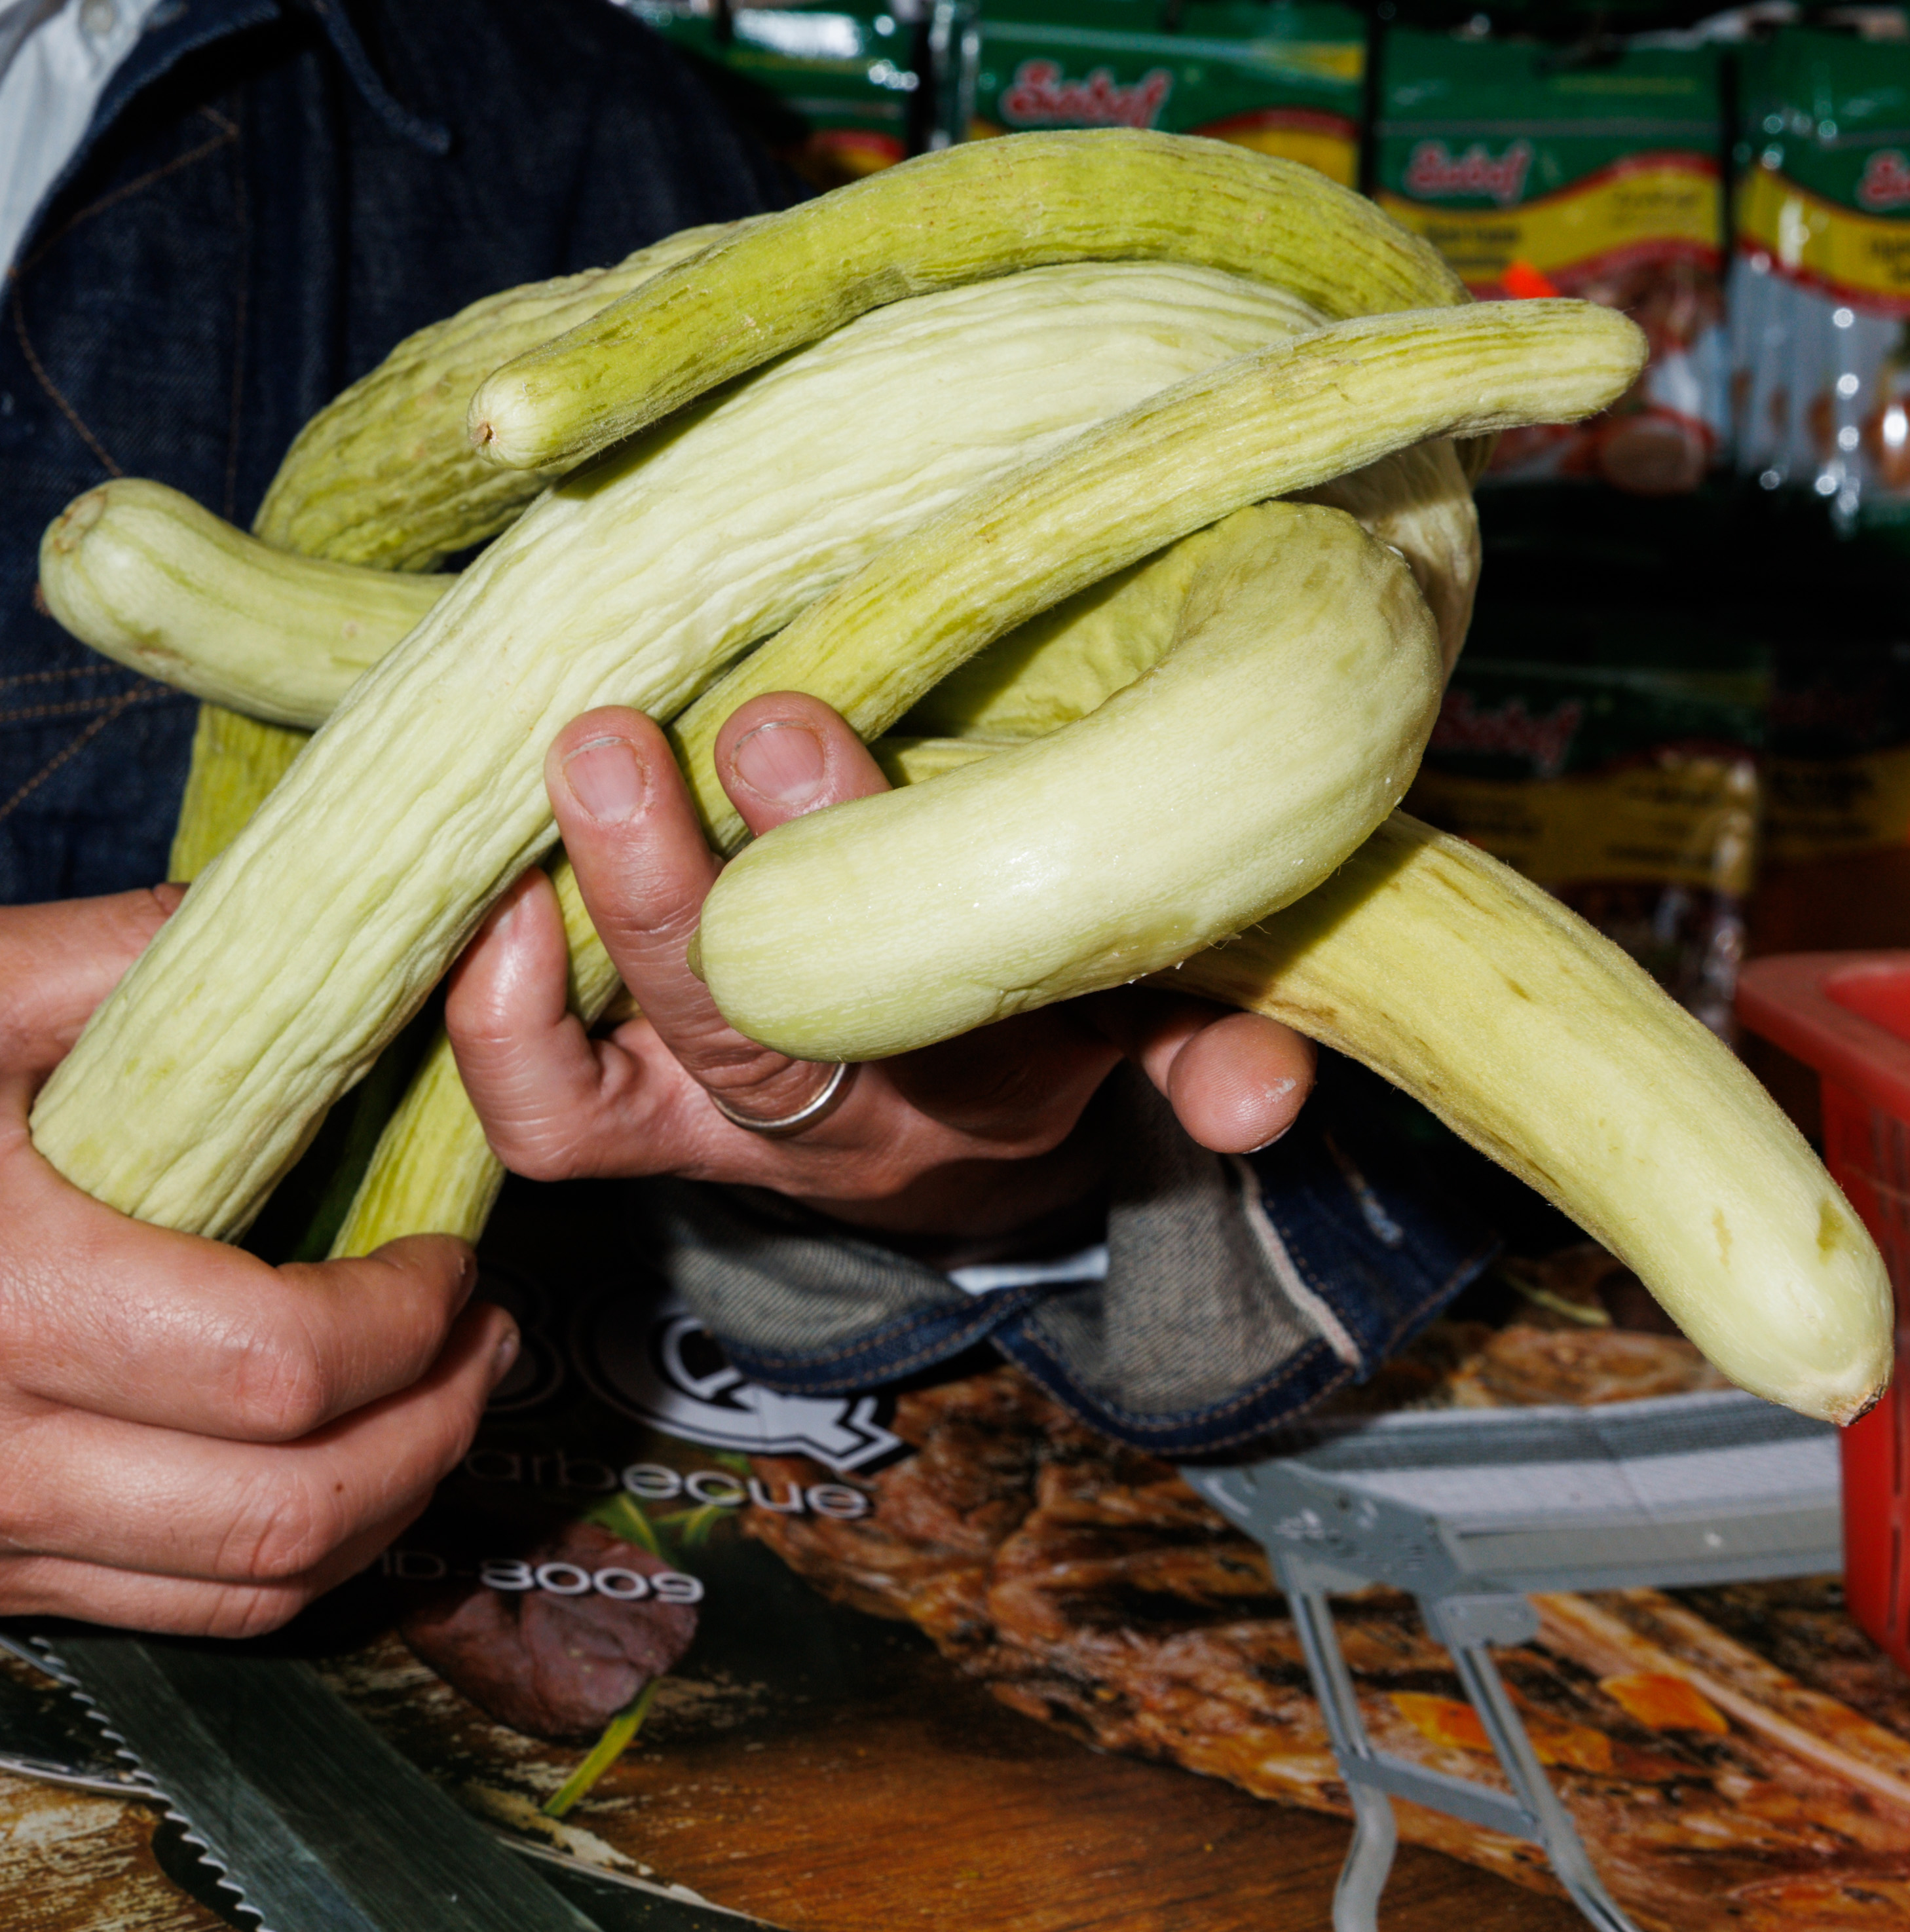 A person is holding several long, yellow-green, curved cucumbers in both hands, with packaged goods visible in the background.